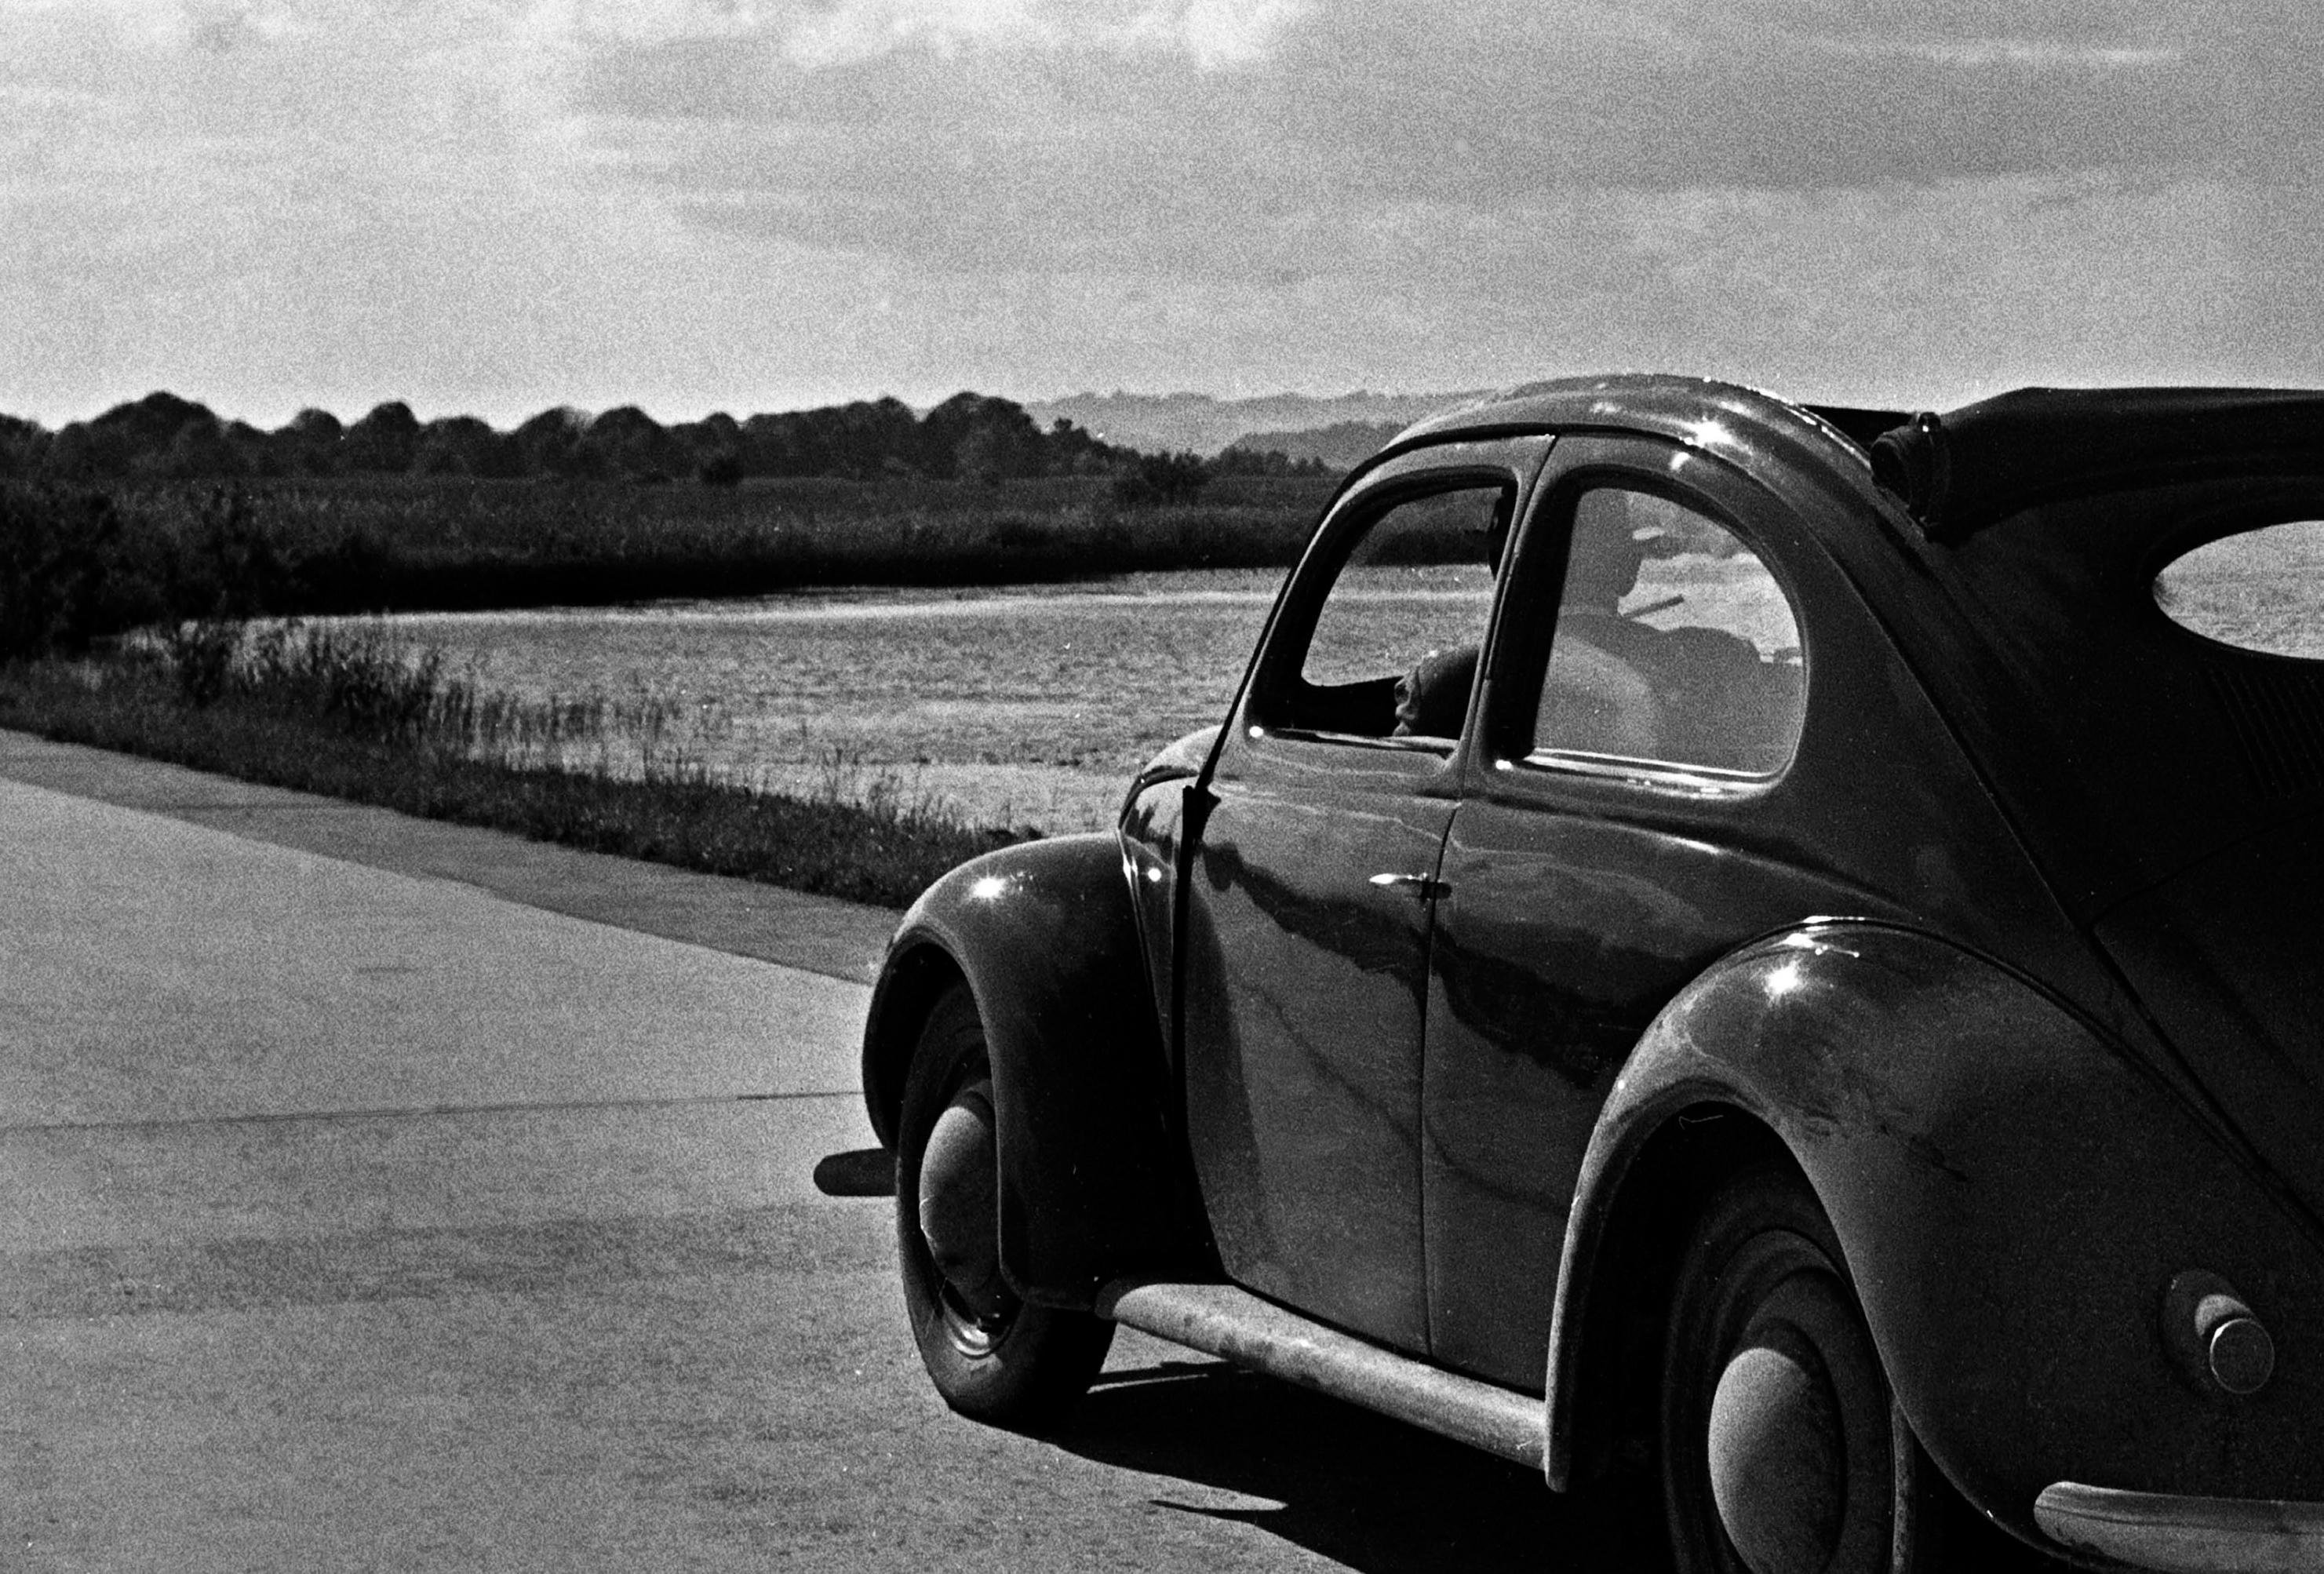 Volkswagen beetle on the streets next to the sea, Germany 1939 Printed Later  - Photograph by Karl Heinrich Lämmel